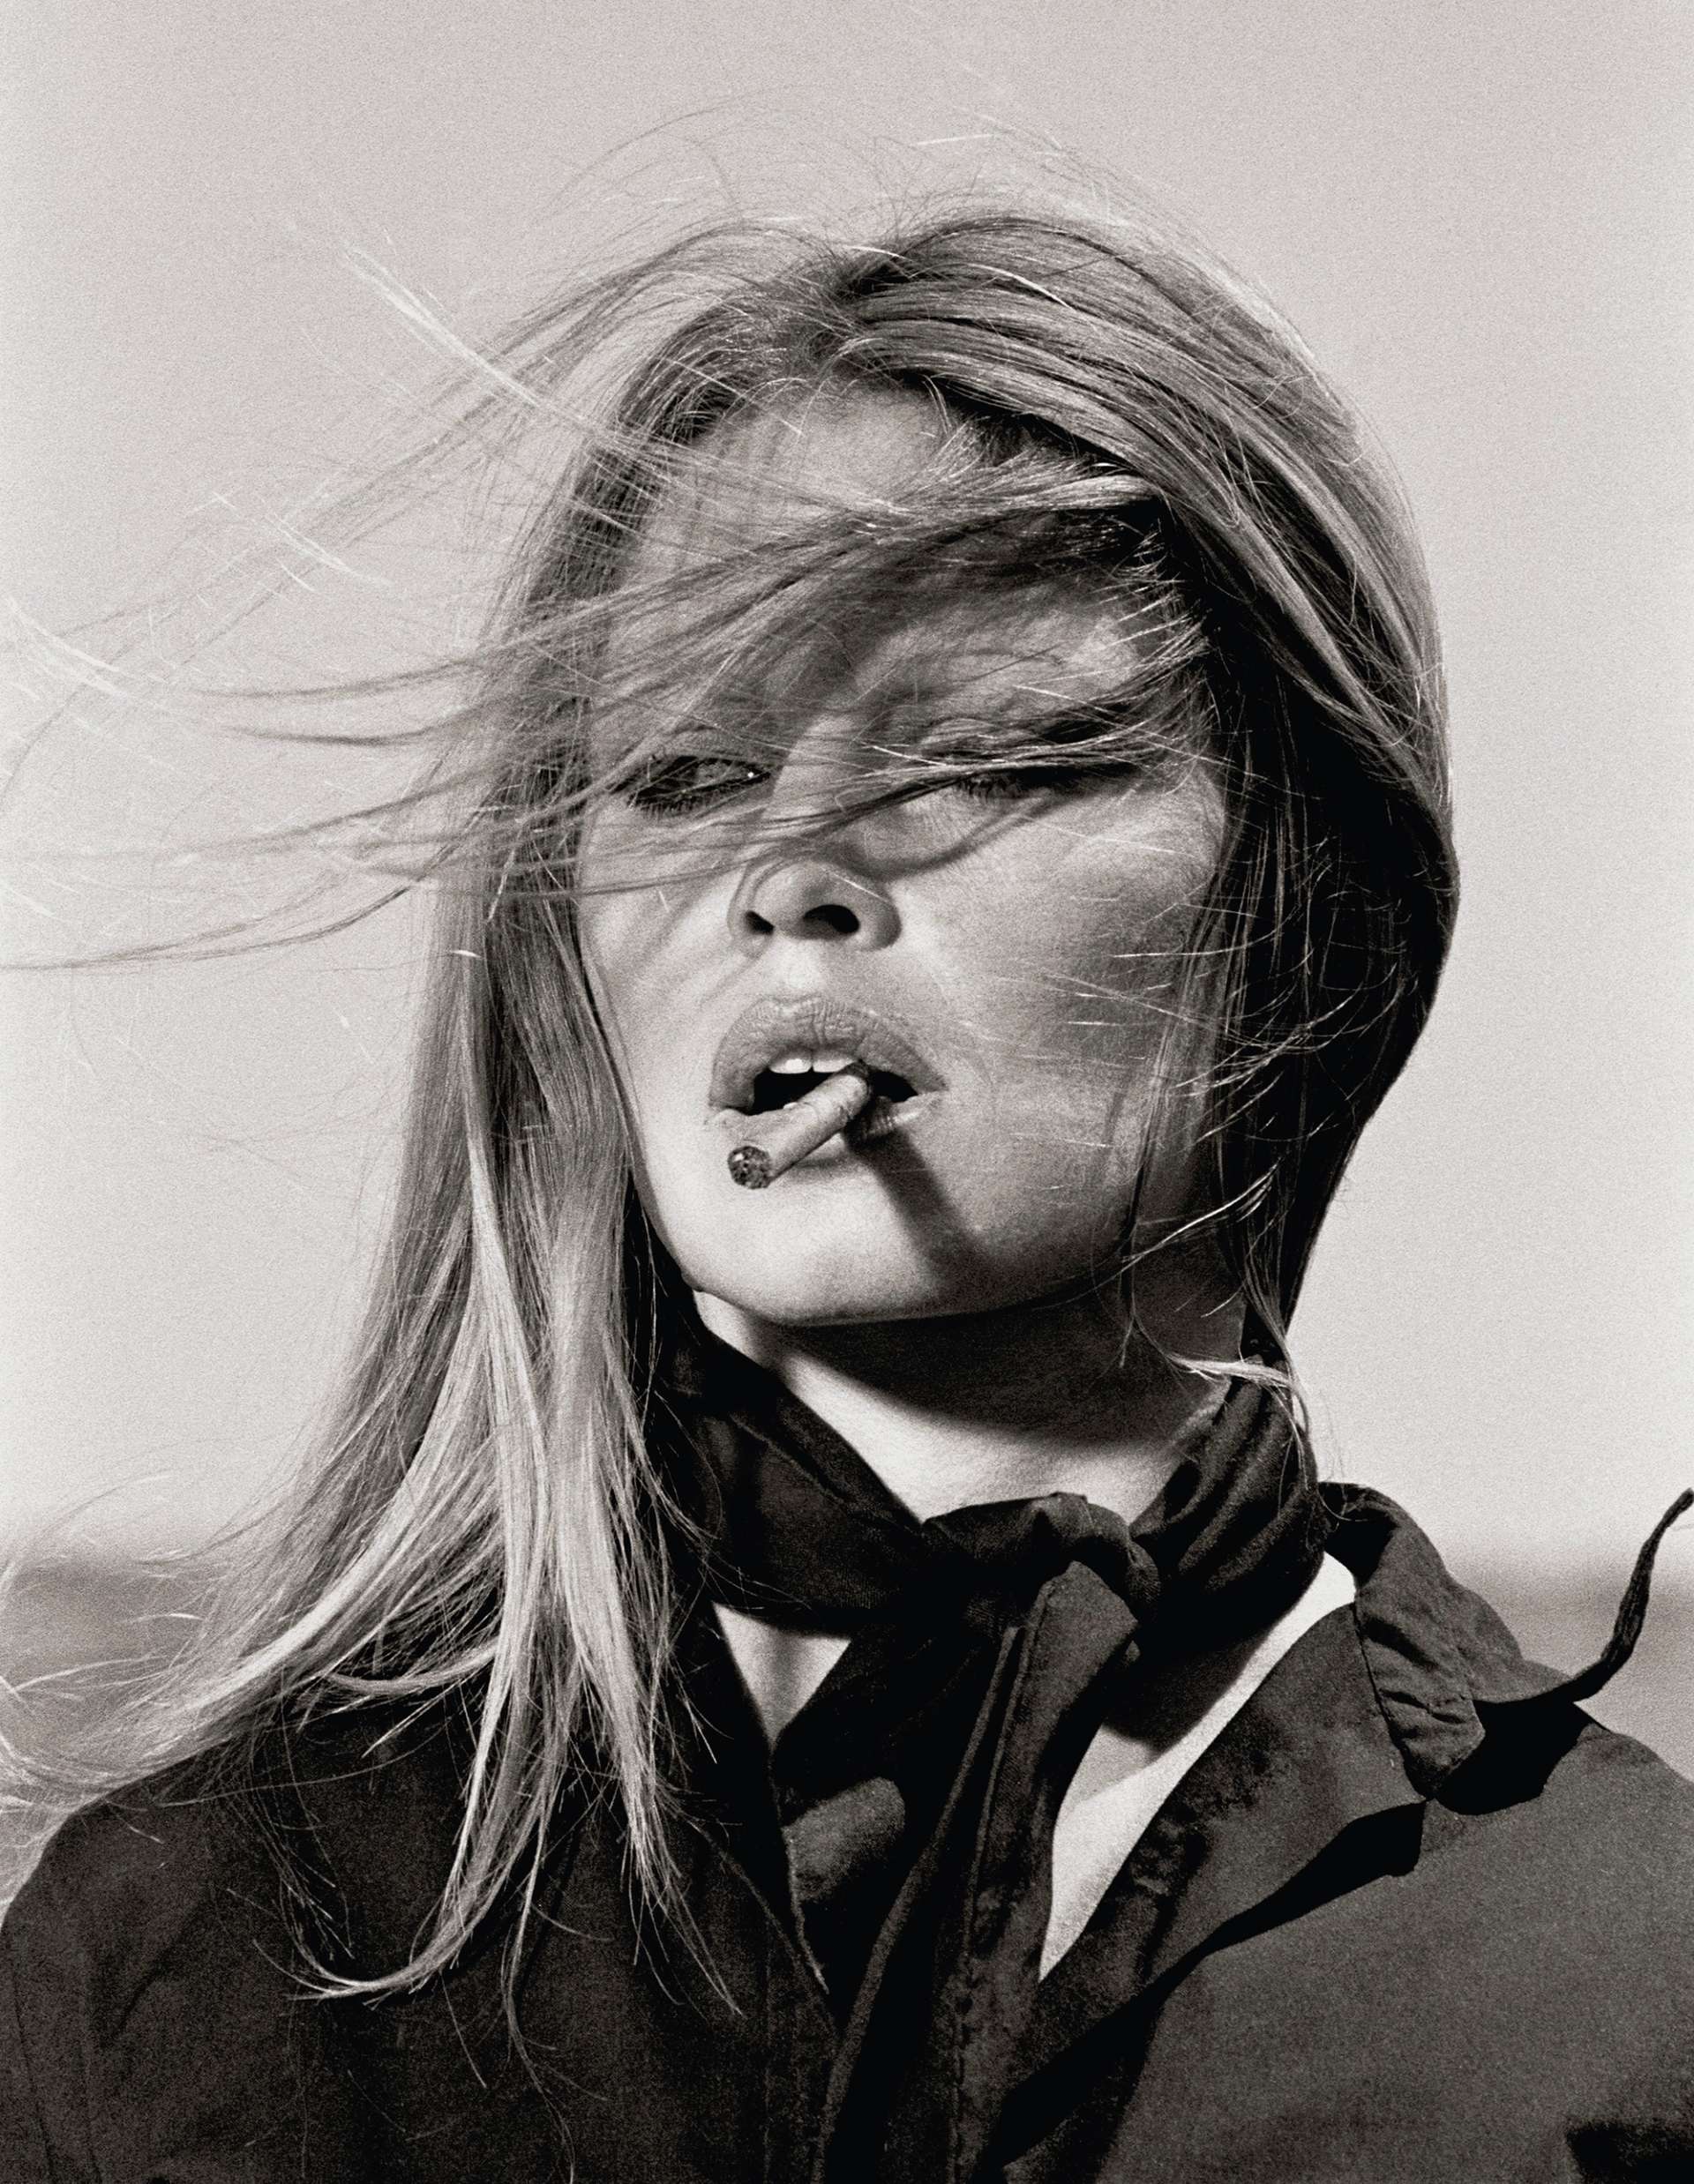 A black and white photograph by Terry O'Neill depicting Bridget Bardot's portrait at the centre of the shot, her hair windswept across her face. Bardot wears a black shirt and neckerchief, and has a lit cigarette between her lips.